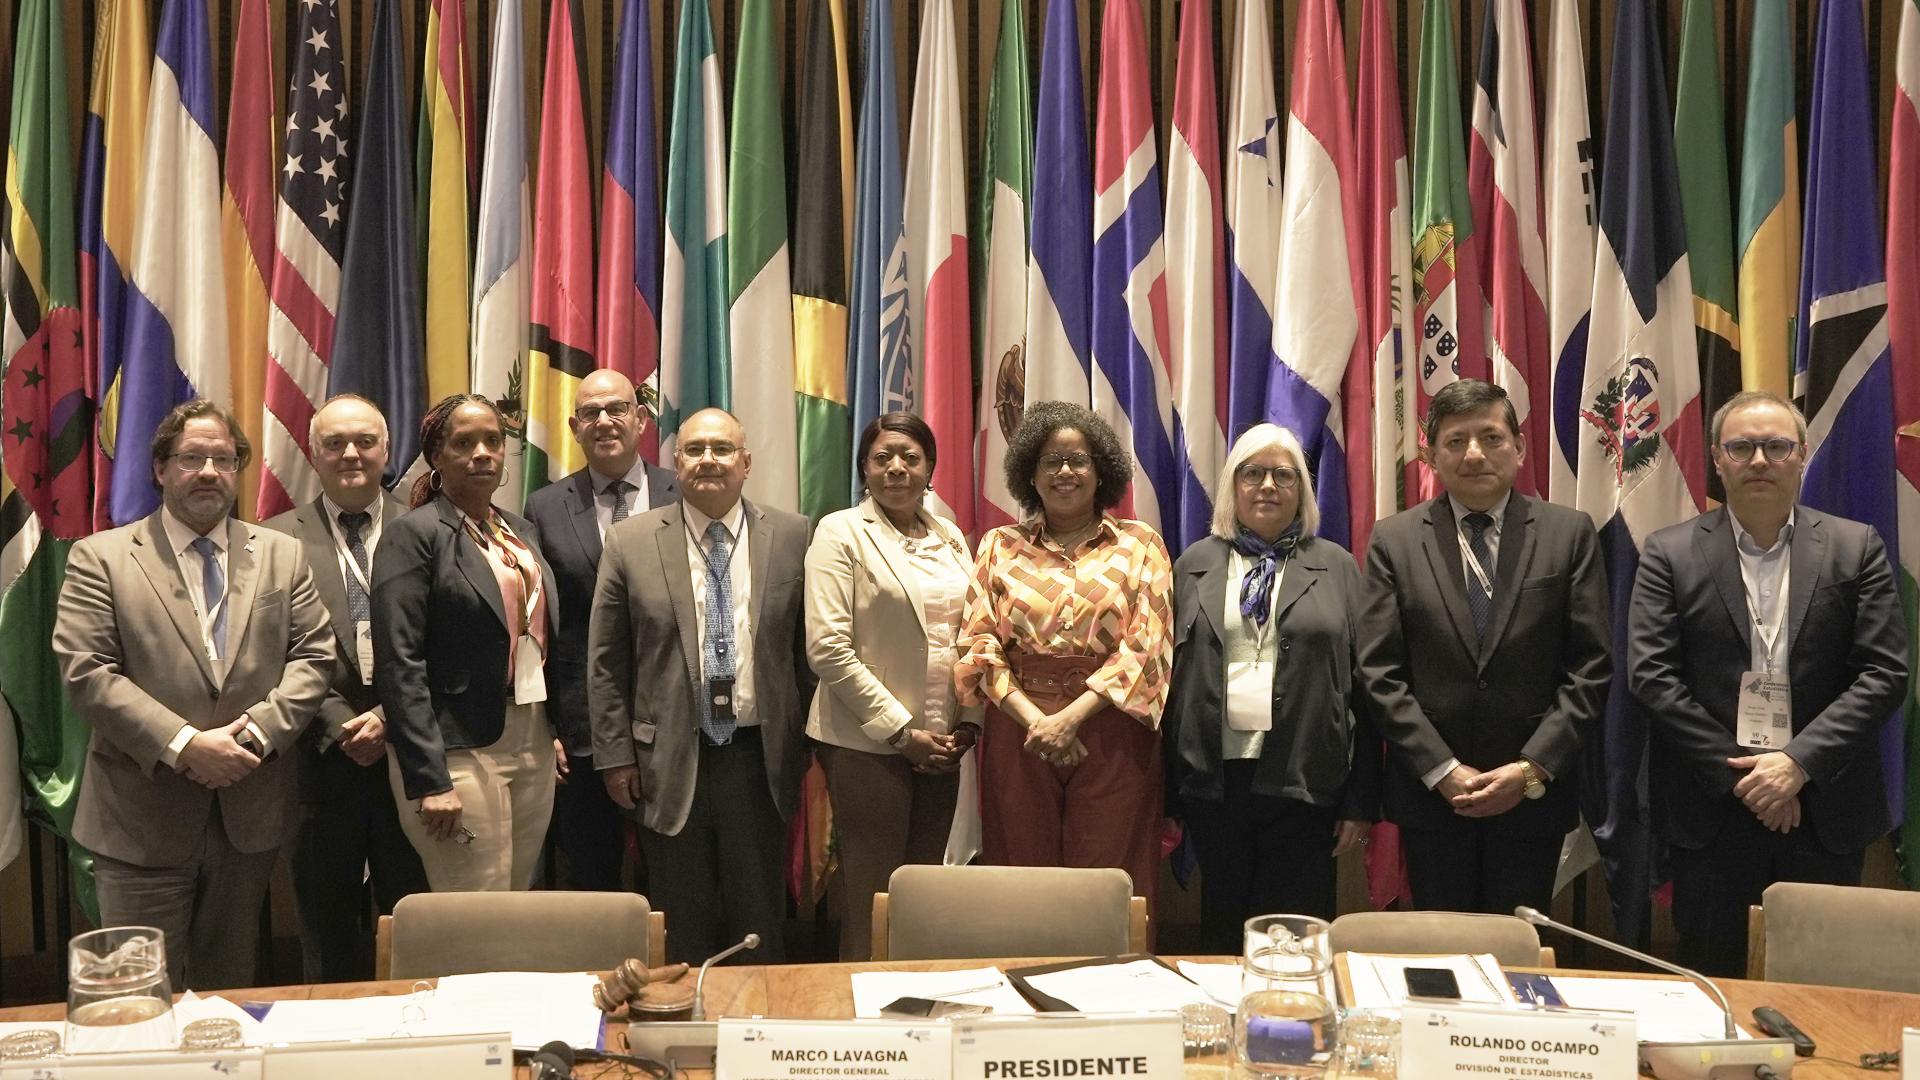 Members of the Executive Committee of the Statistical Conference of the Americas.